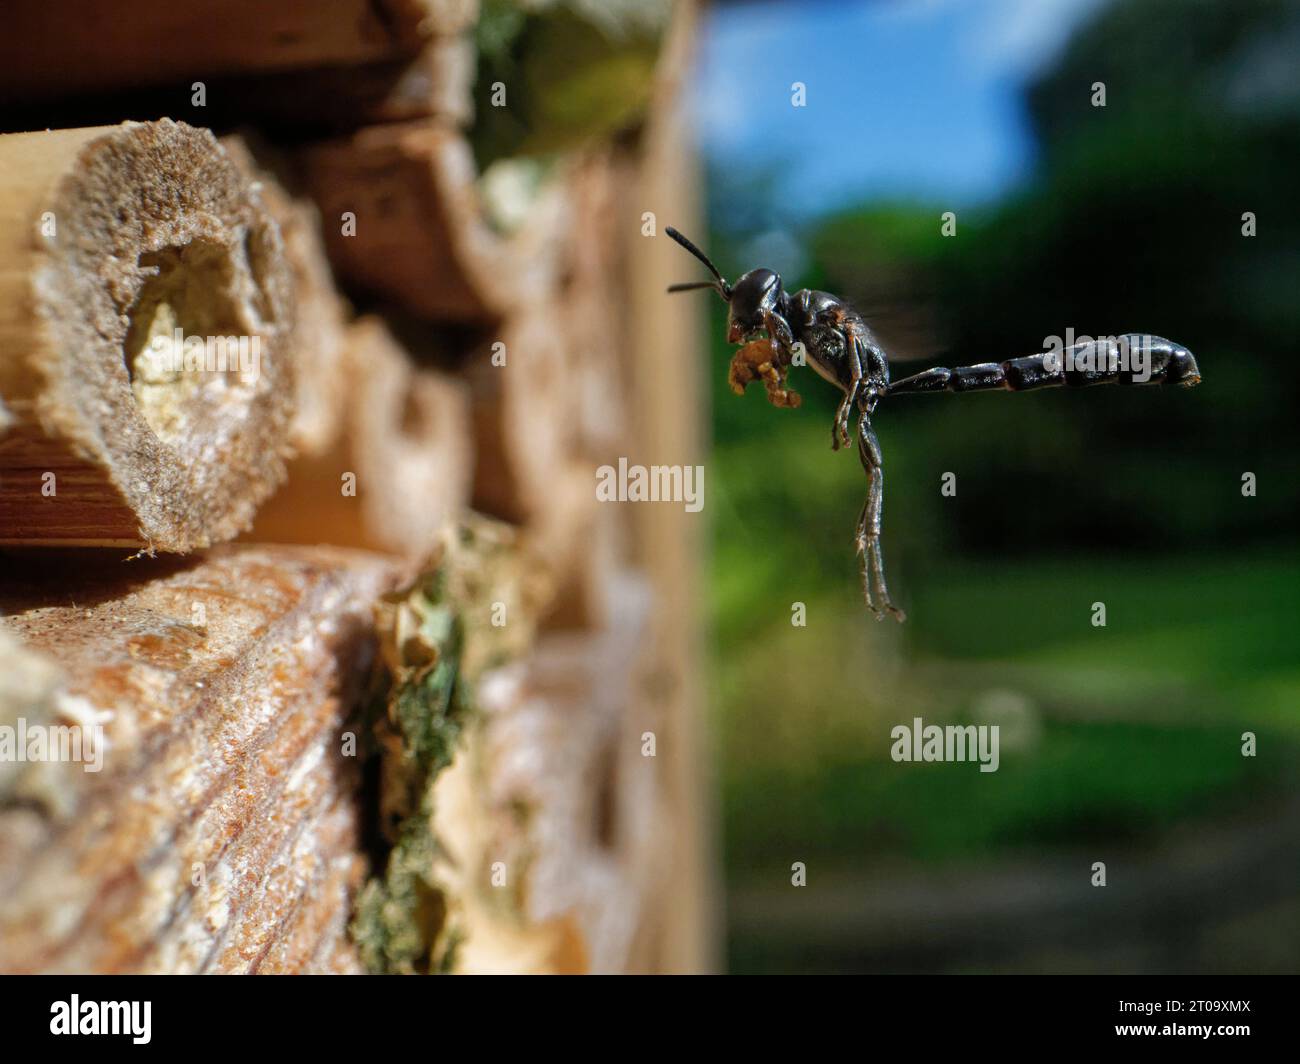 Club-horned wood borer wasp (Trypoxylon clavicerum) flying to its nest in an insect hotel with a ball of mud to seal the nest with, Wiltshire, UK. Stock Photo